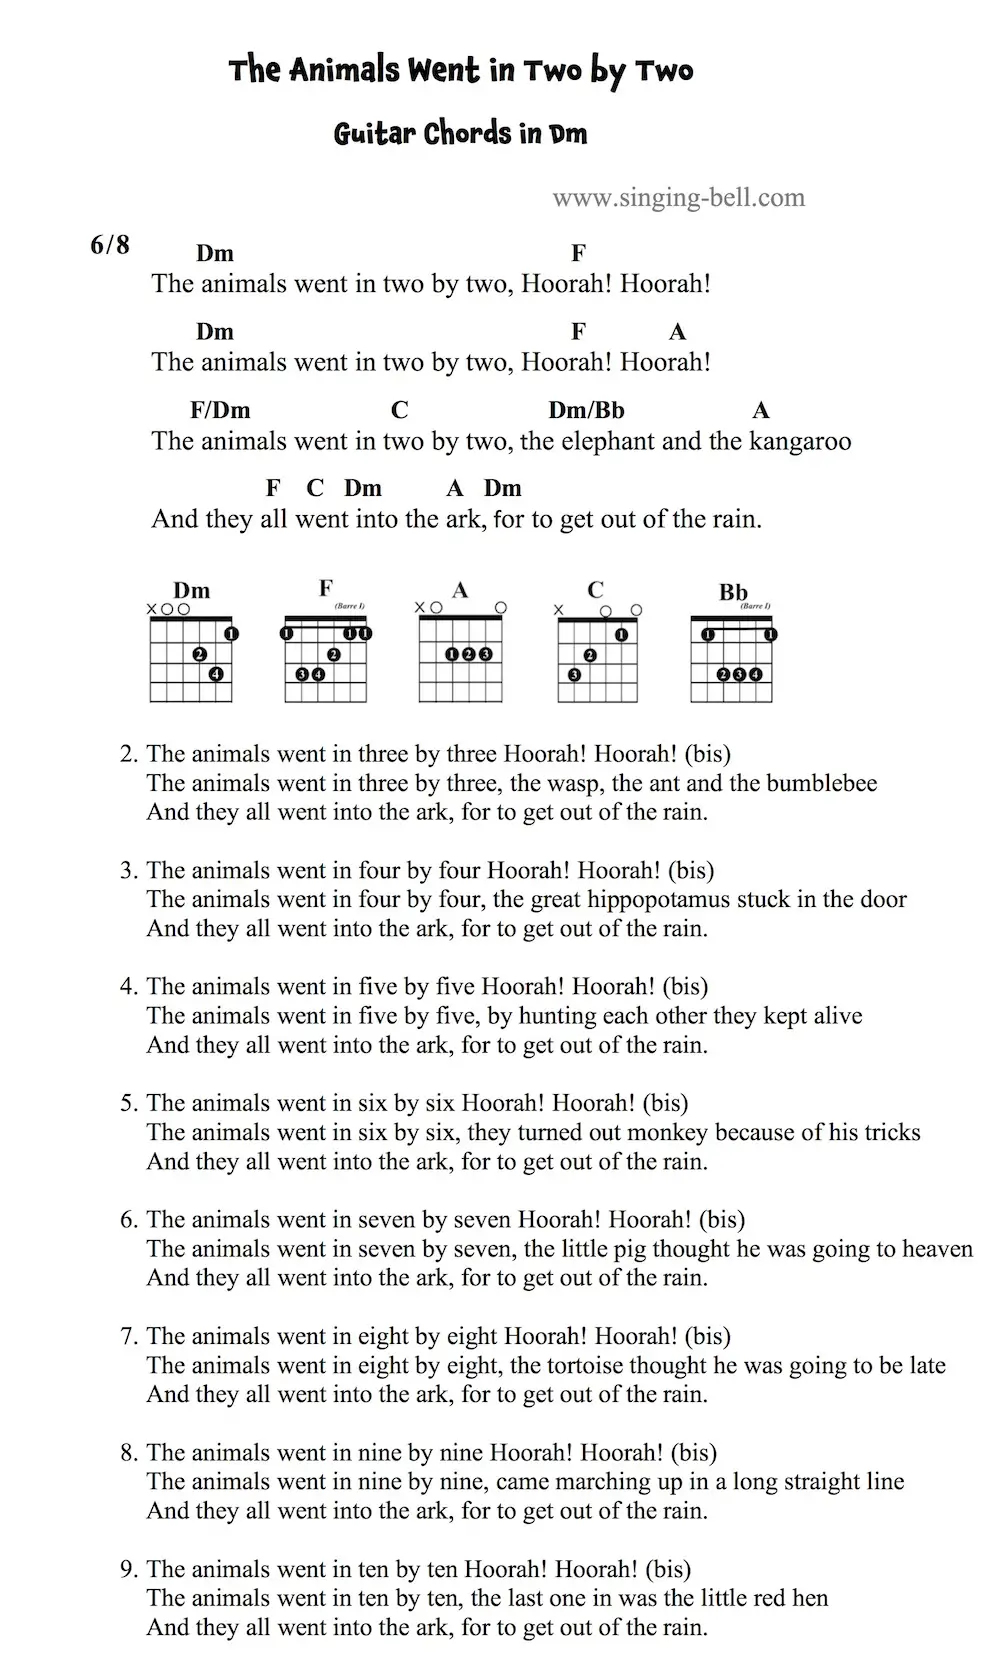 The Animals Went in Two by Two - Guitar Chords and Tabs in Dm.